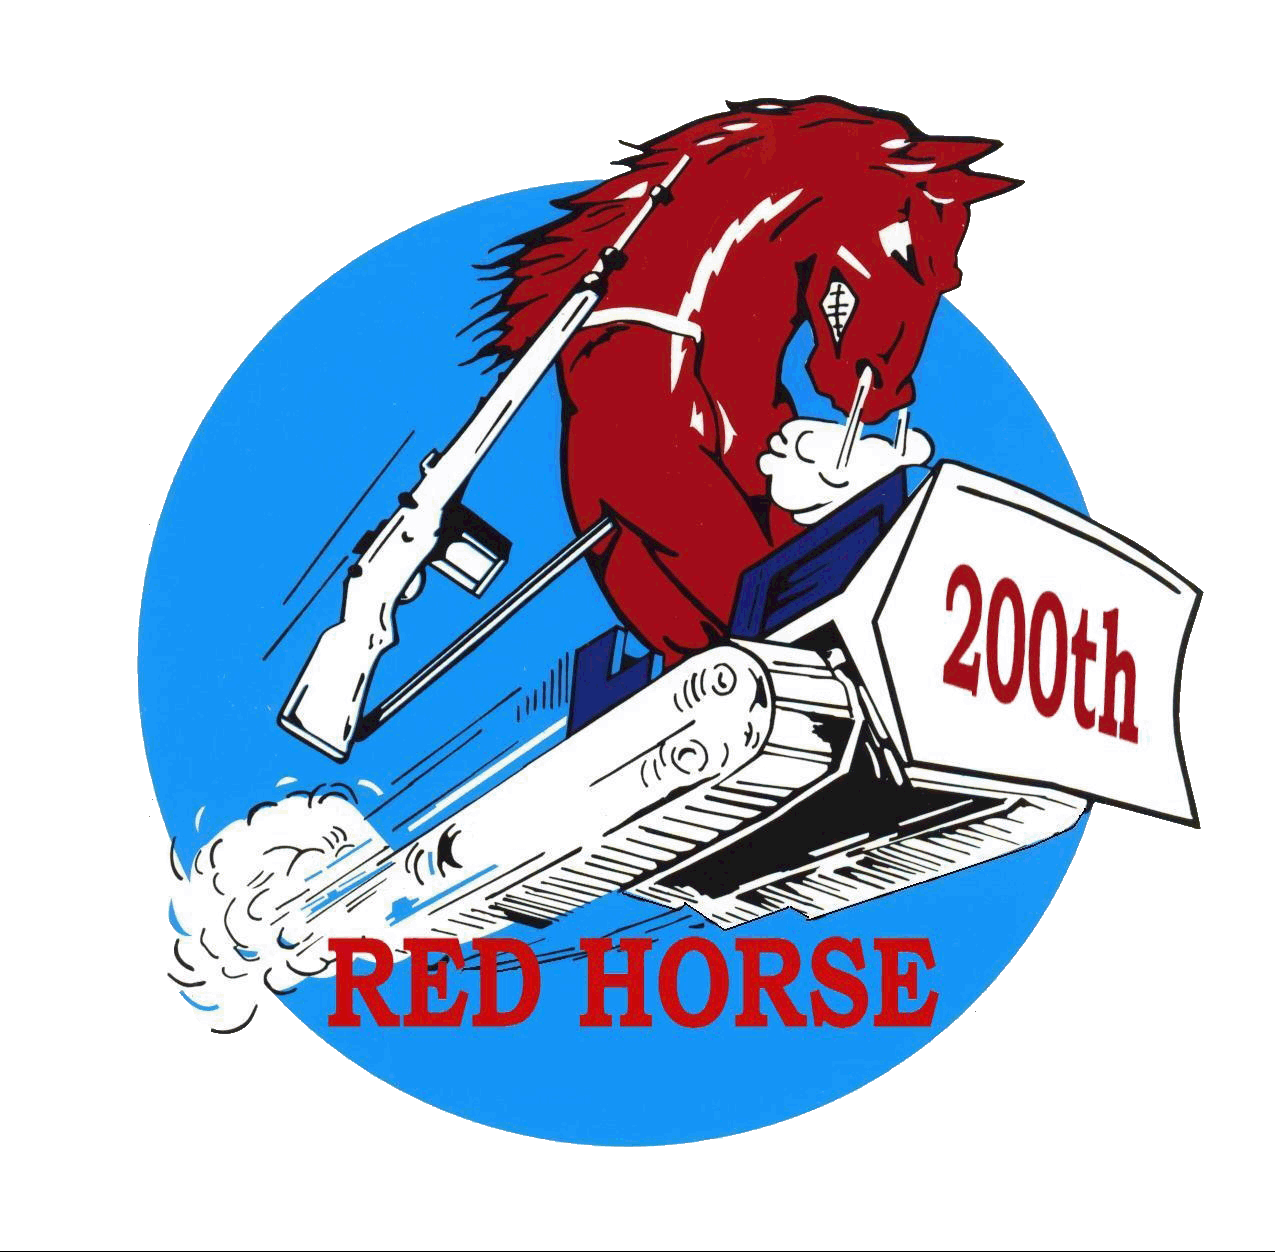 RED HORSE logo